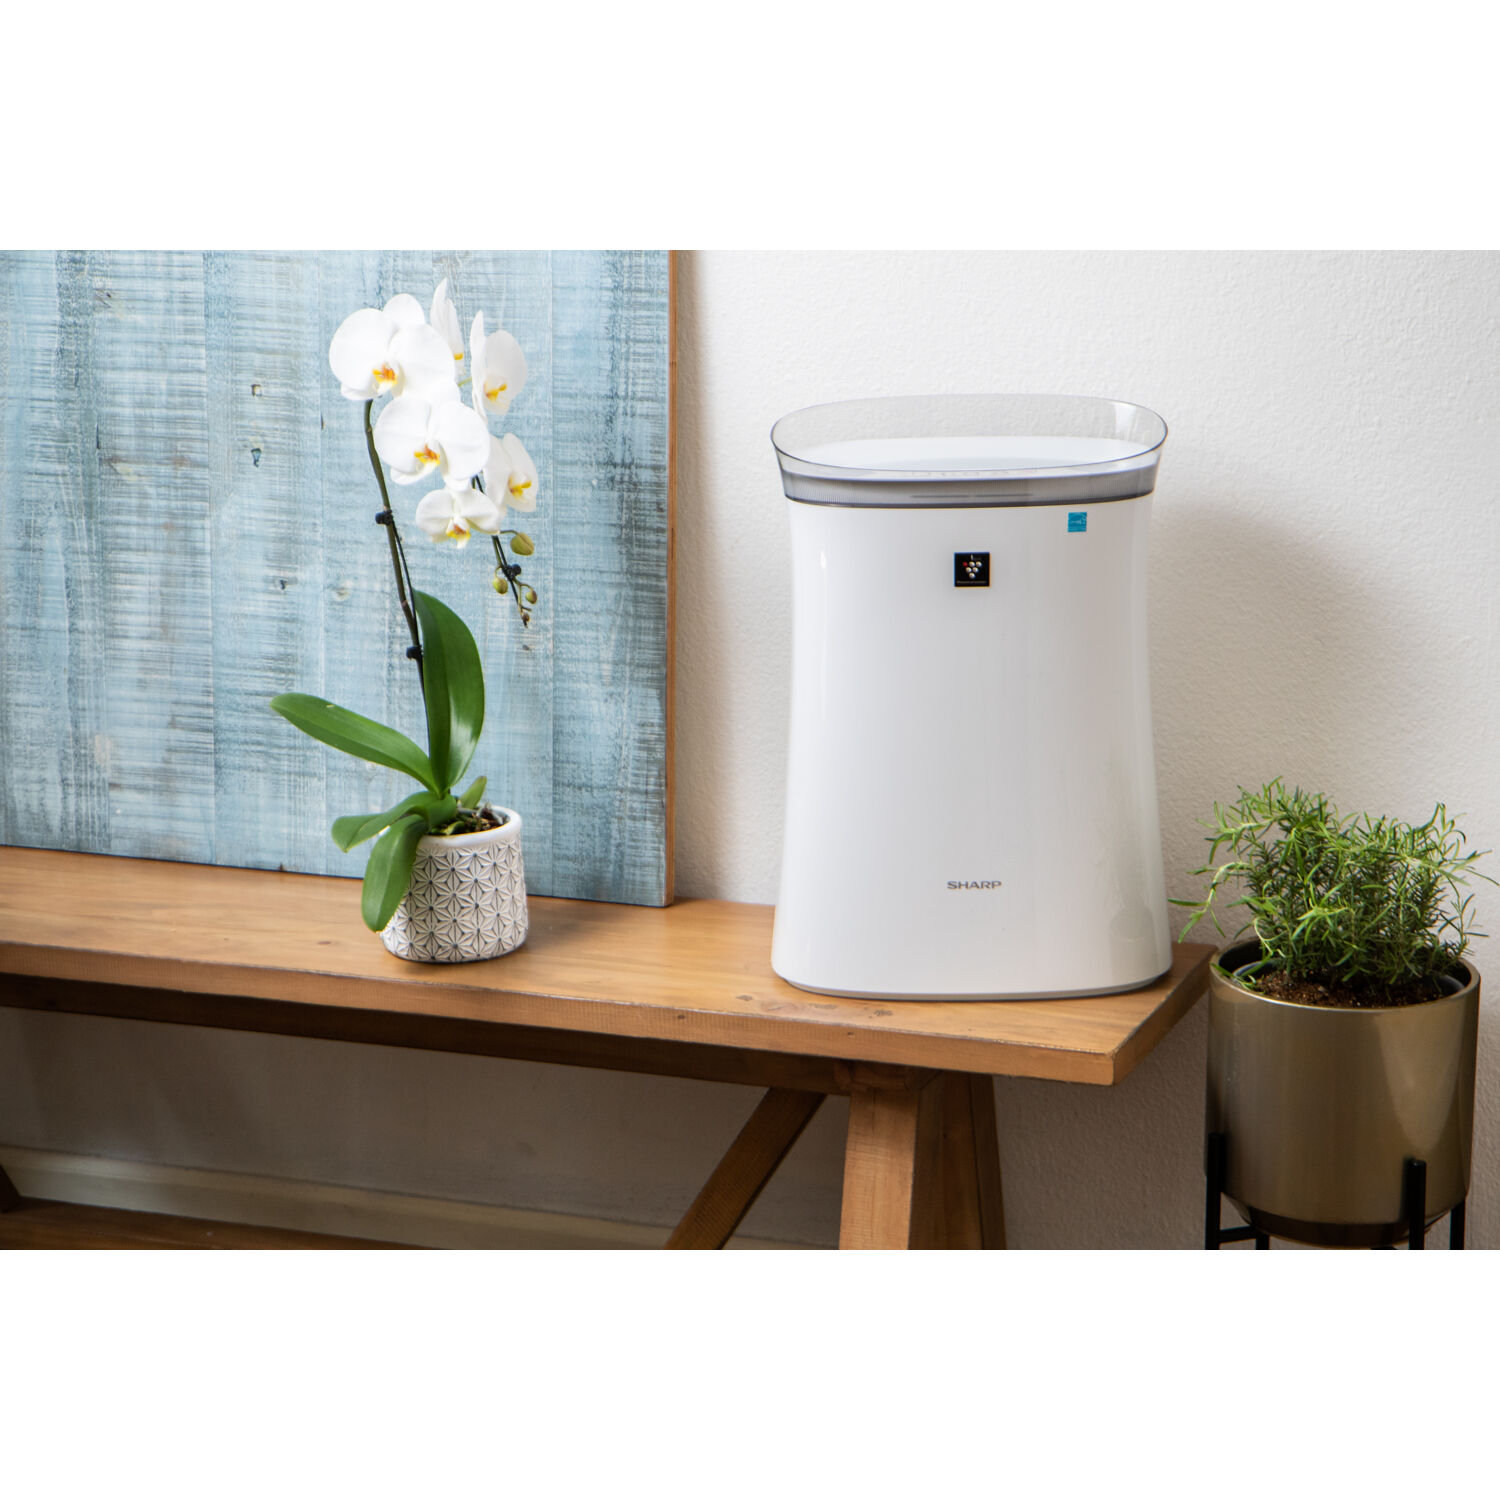 ELEOPTION Console Air Purifier with Ozone Generator Filter